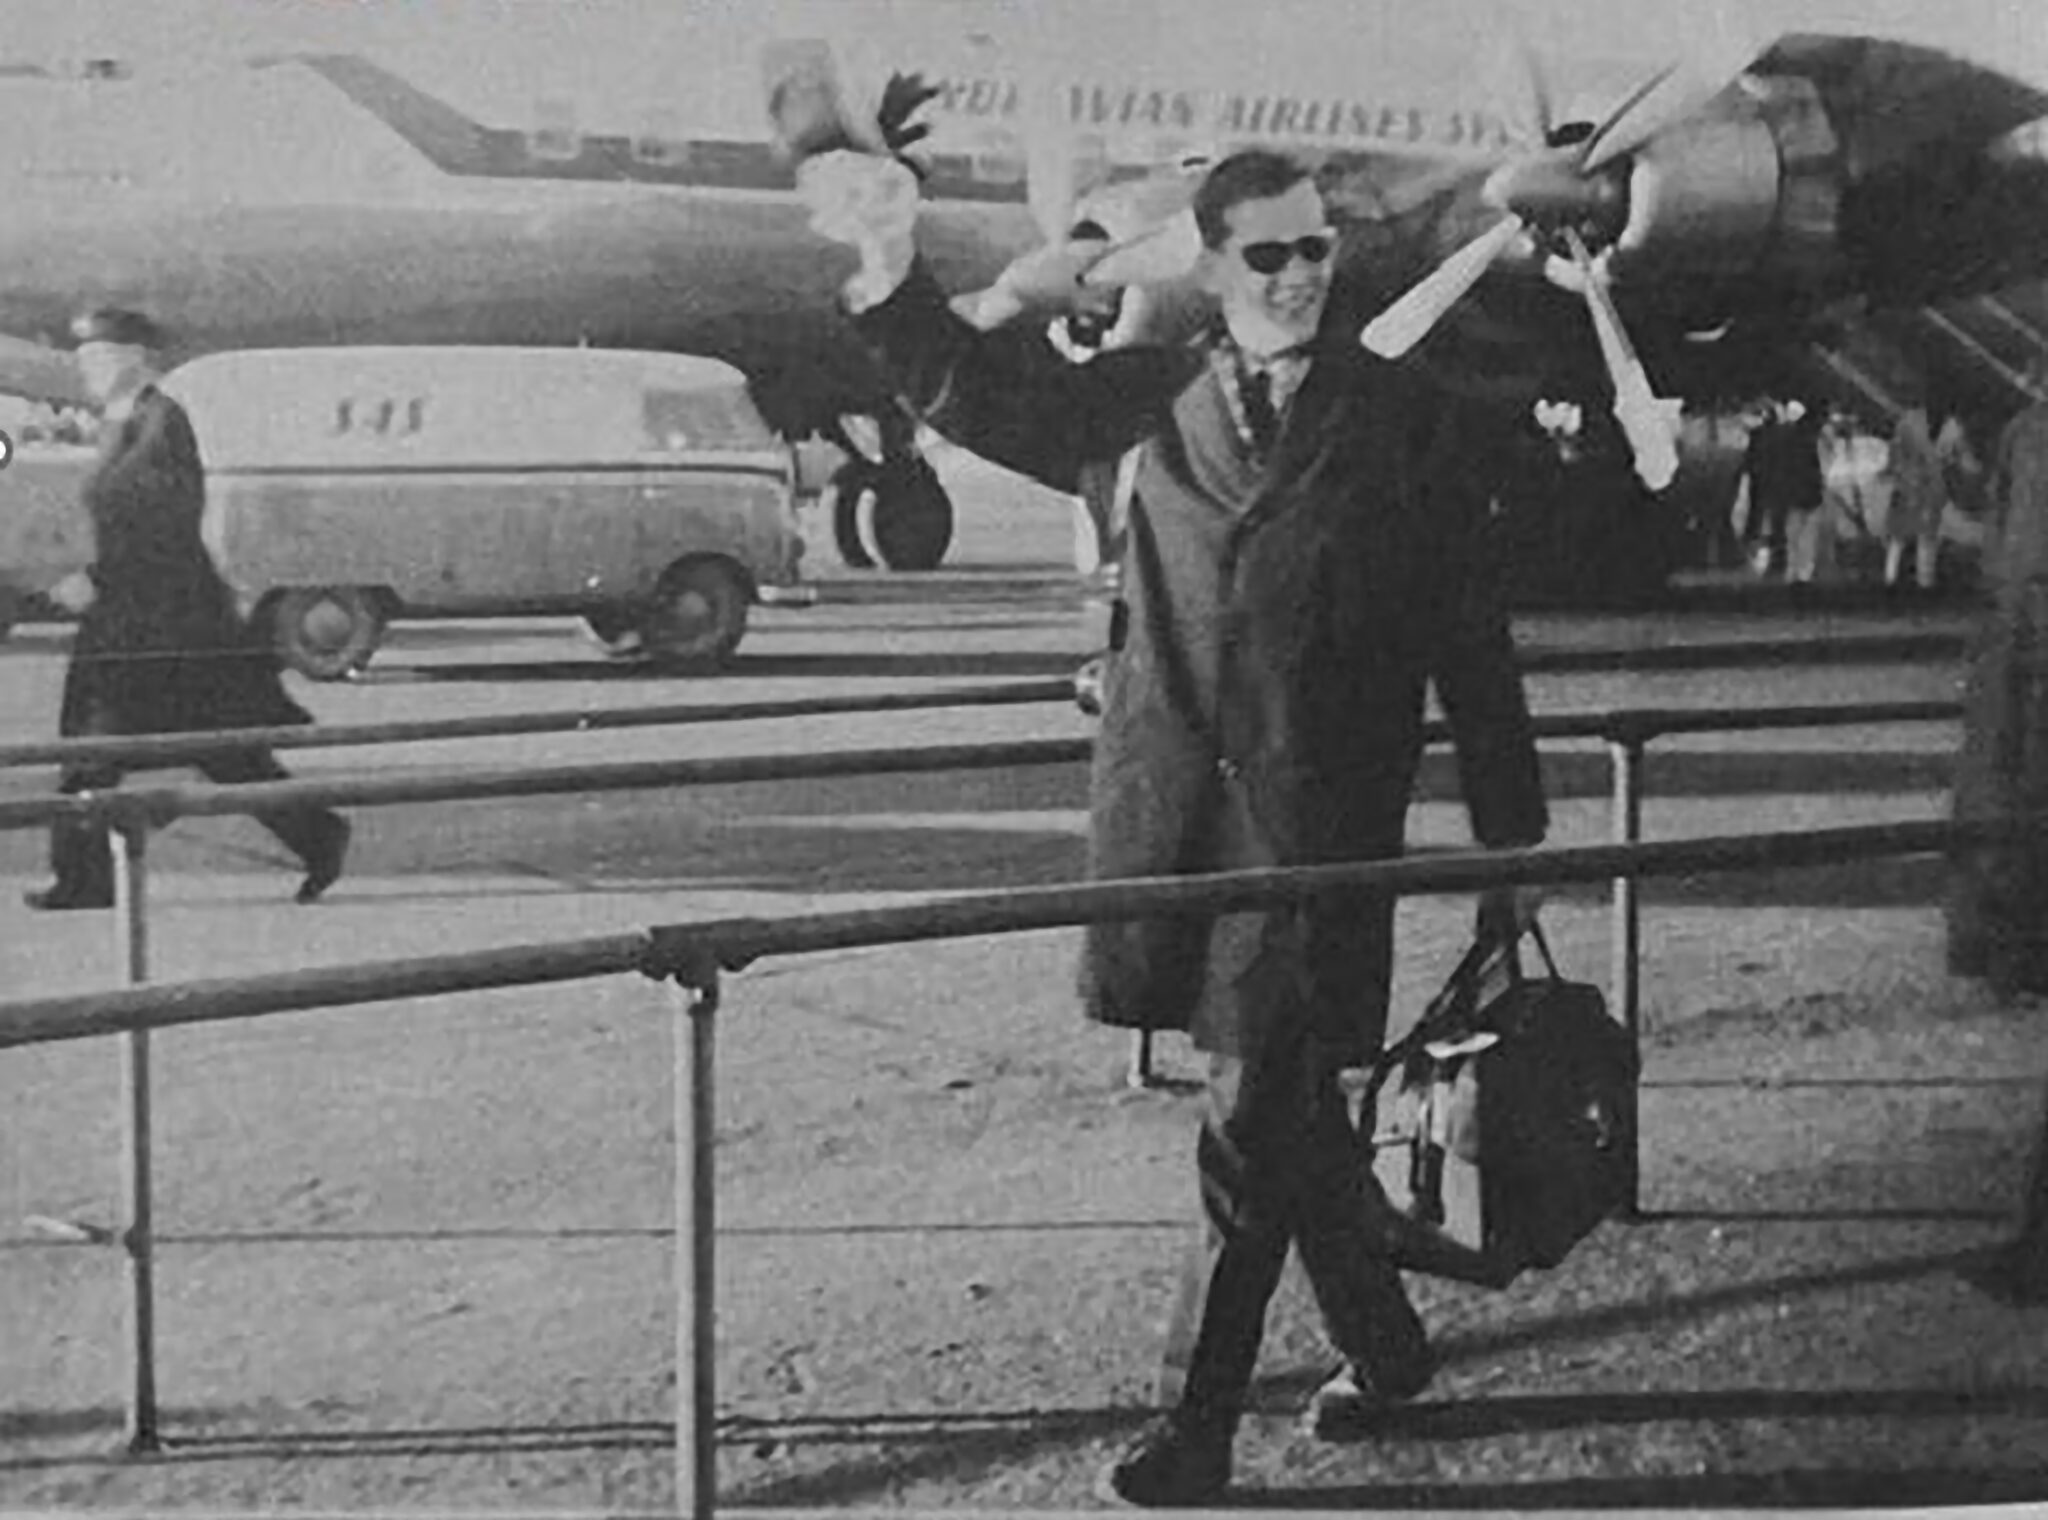 Black and white photo of EIvind Bjerke with planes in background used on cover.